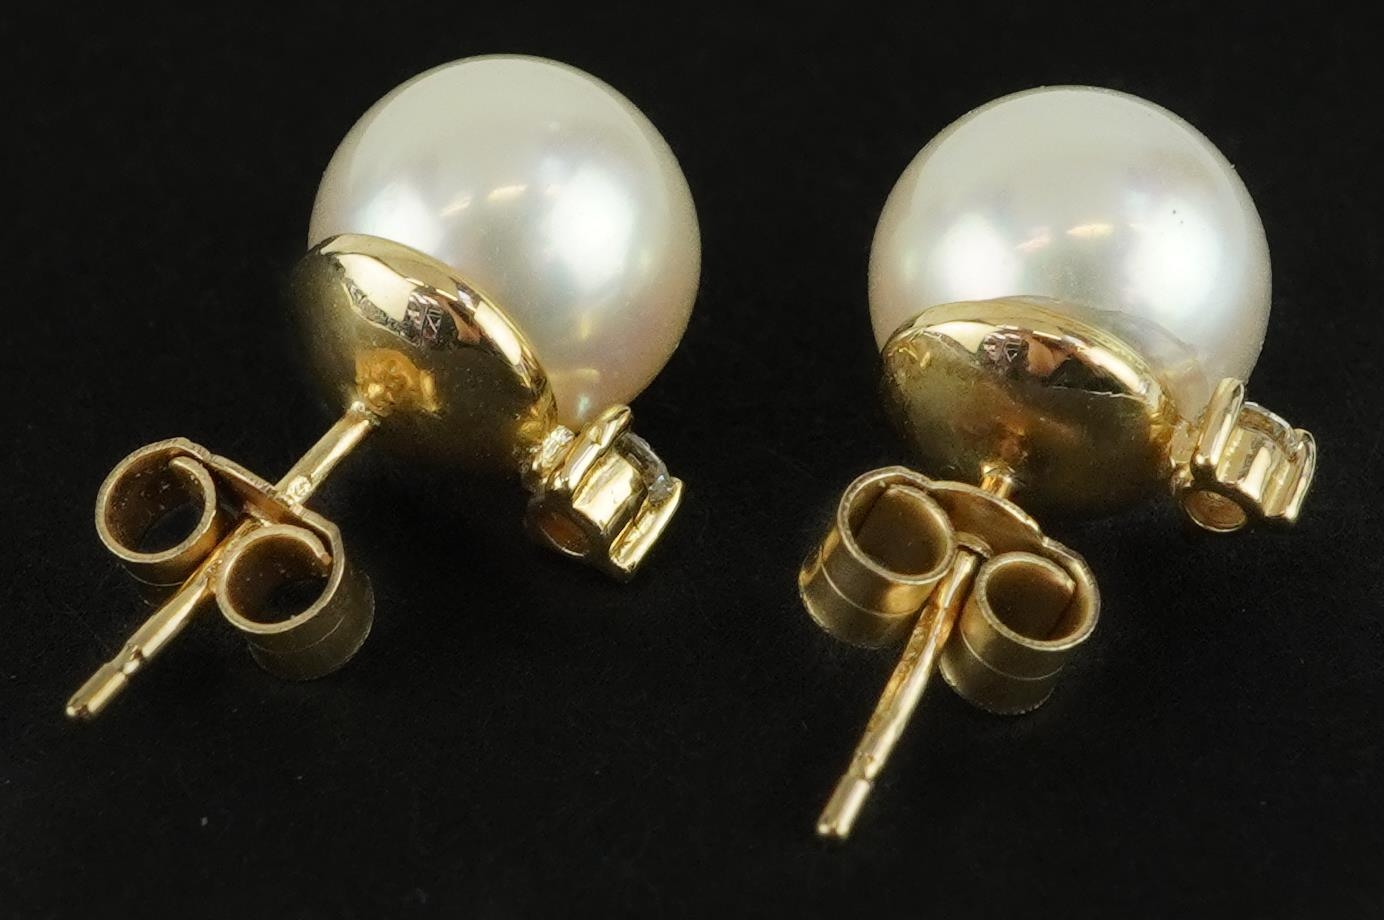 Pair of 9ct gold cultured pearl and diamond stud earrings, 1.1cm high, 2.7g - Image 2 of 2